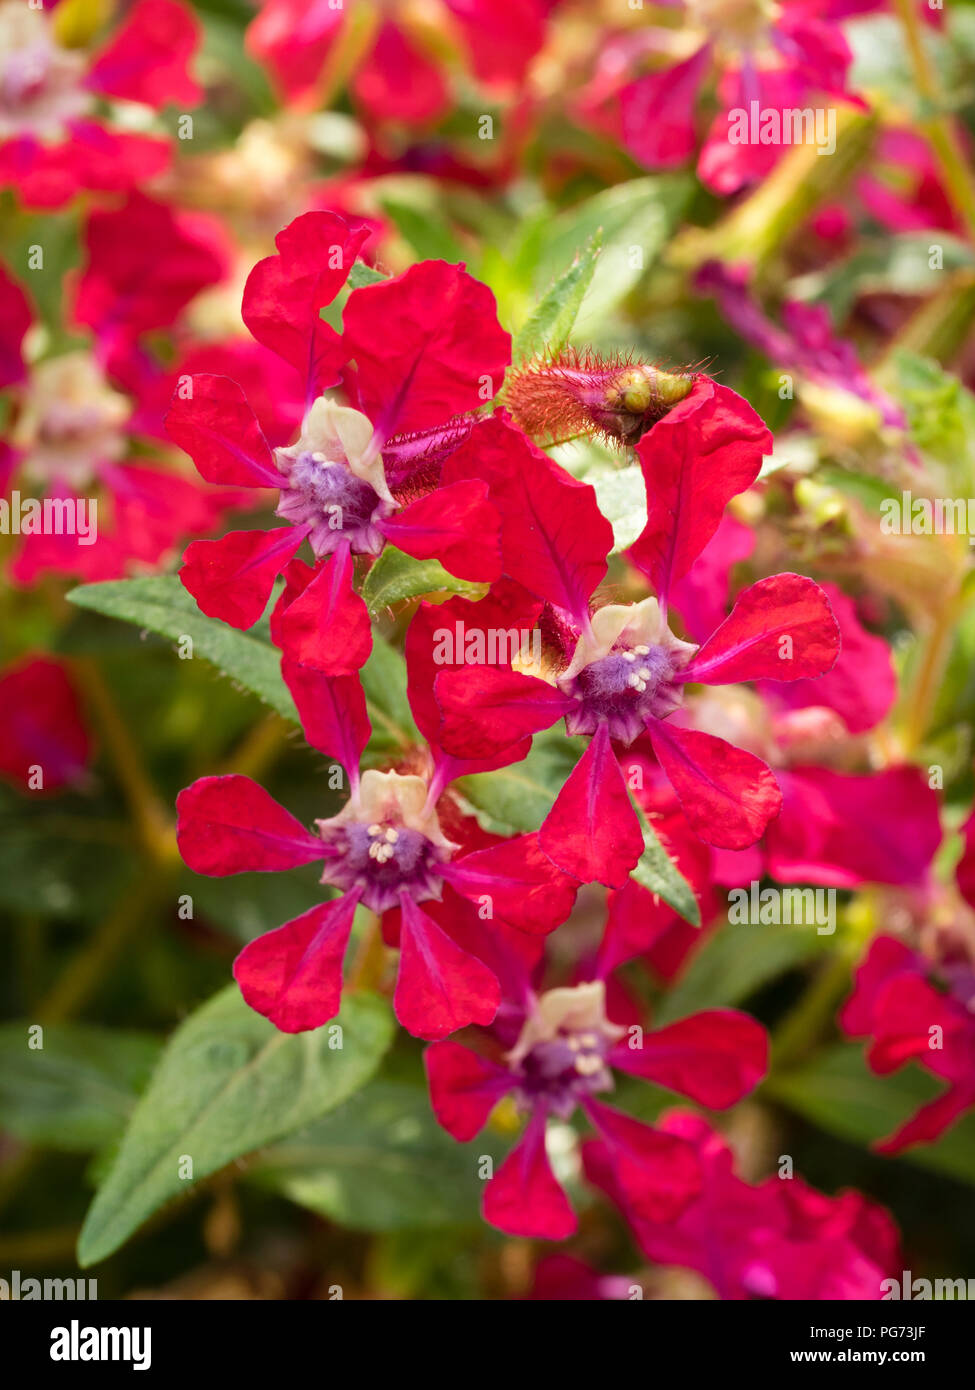 Red flowers of Cuphea blepharophylla, a tender perennial usually grown as an annual for summer bedding schemes Stock Photo